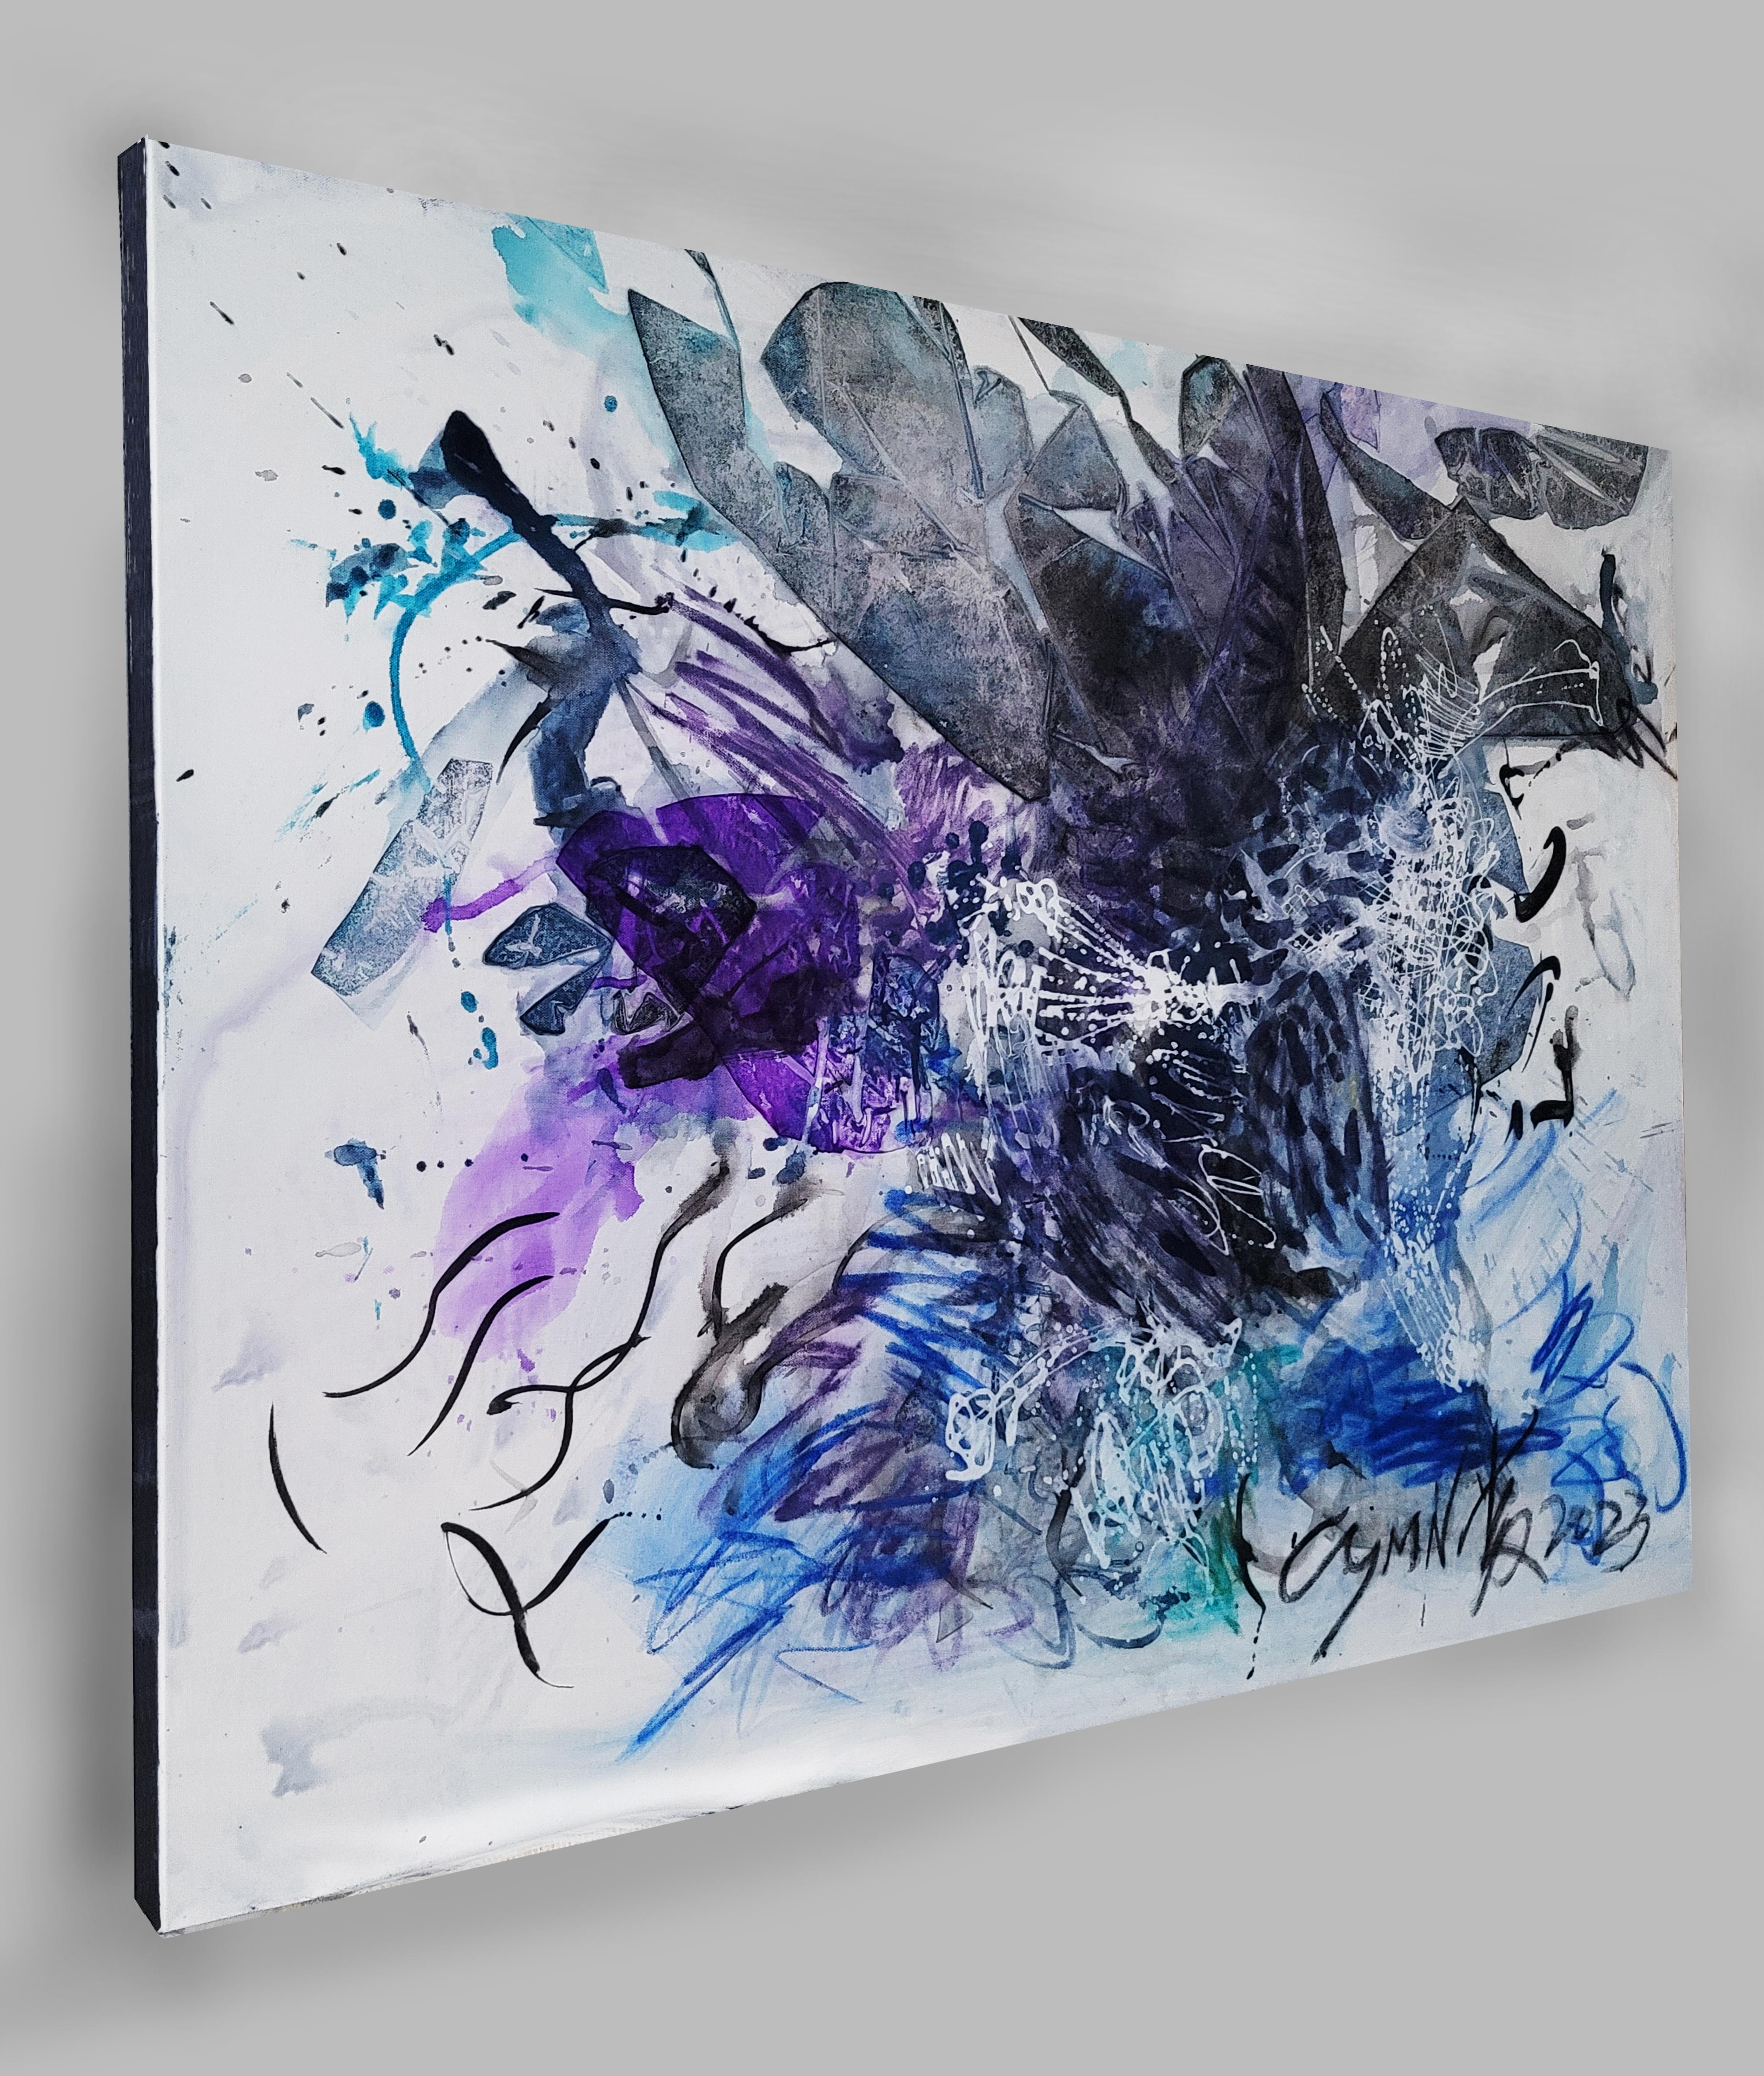 Creating on the vibrant energy of abstract expressionism, this dynamic painting process celebrates the power of growth and transformation through the image of a sprouting plant which arms out as if it is to hold the totality of man’s world.  It also